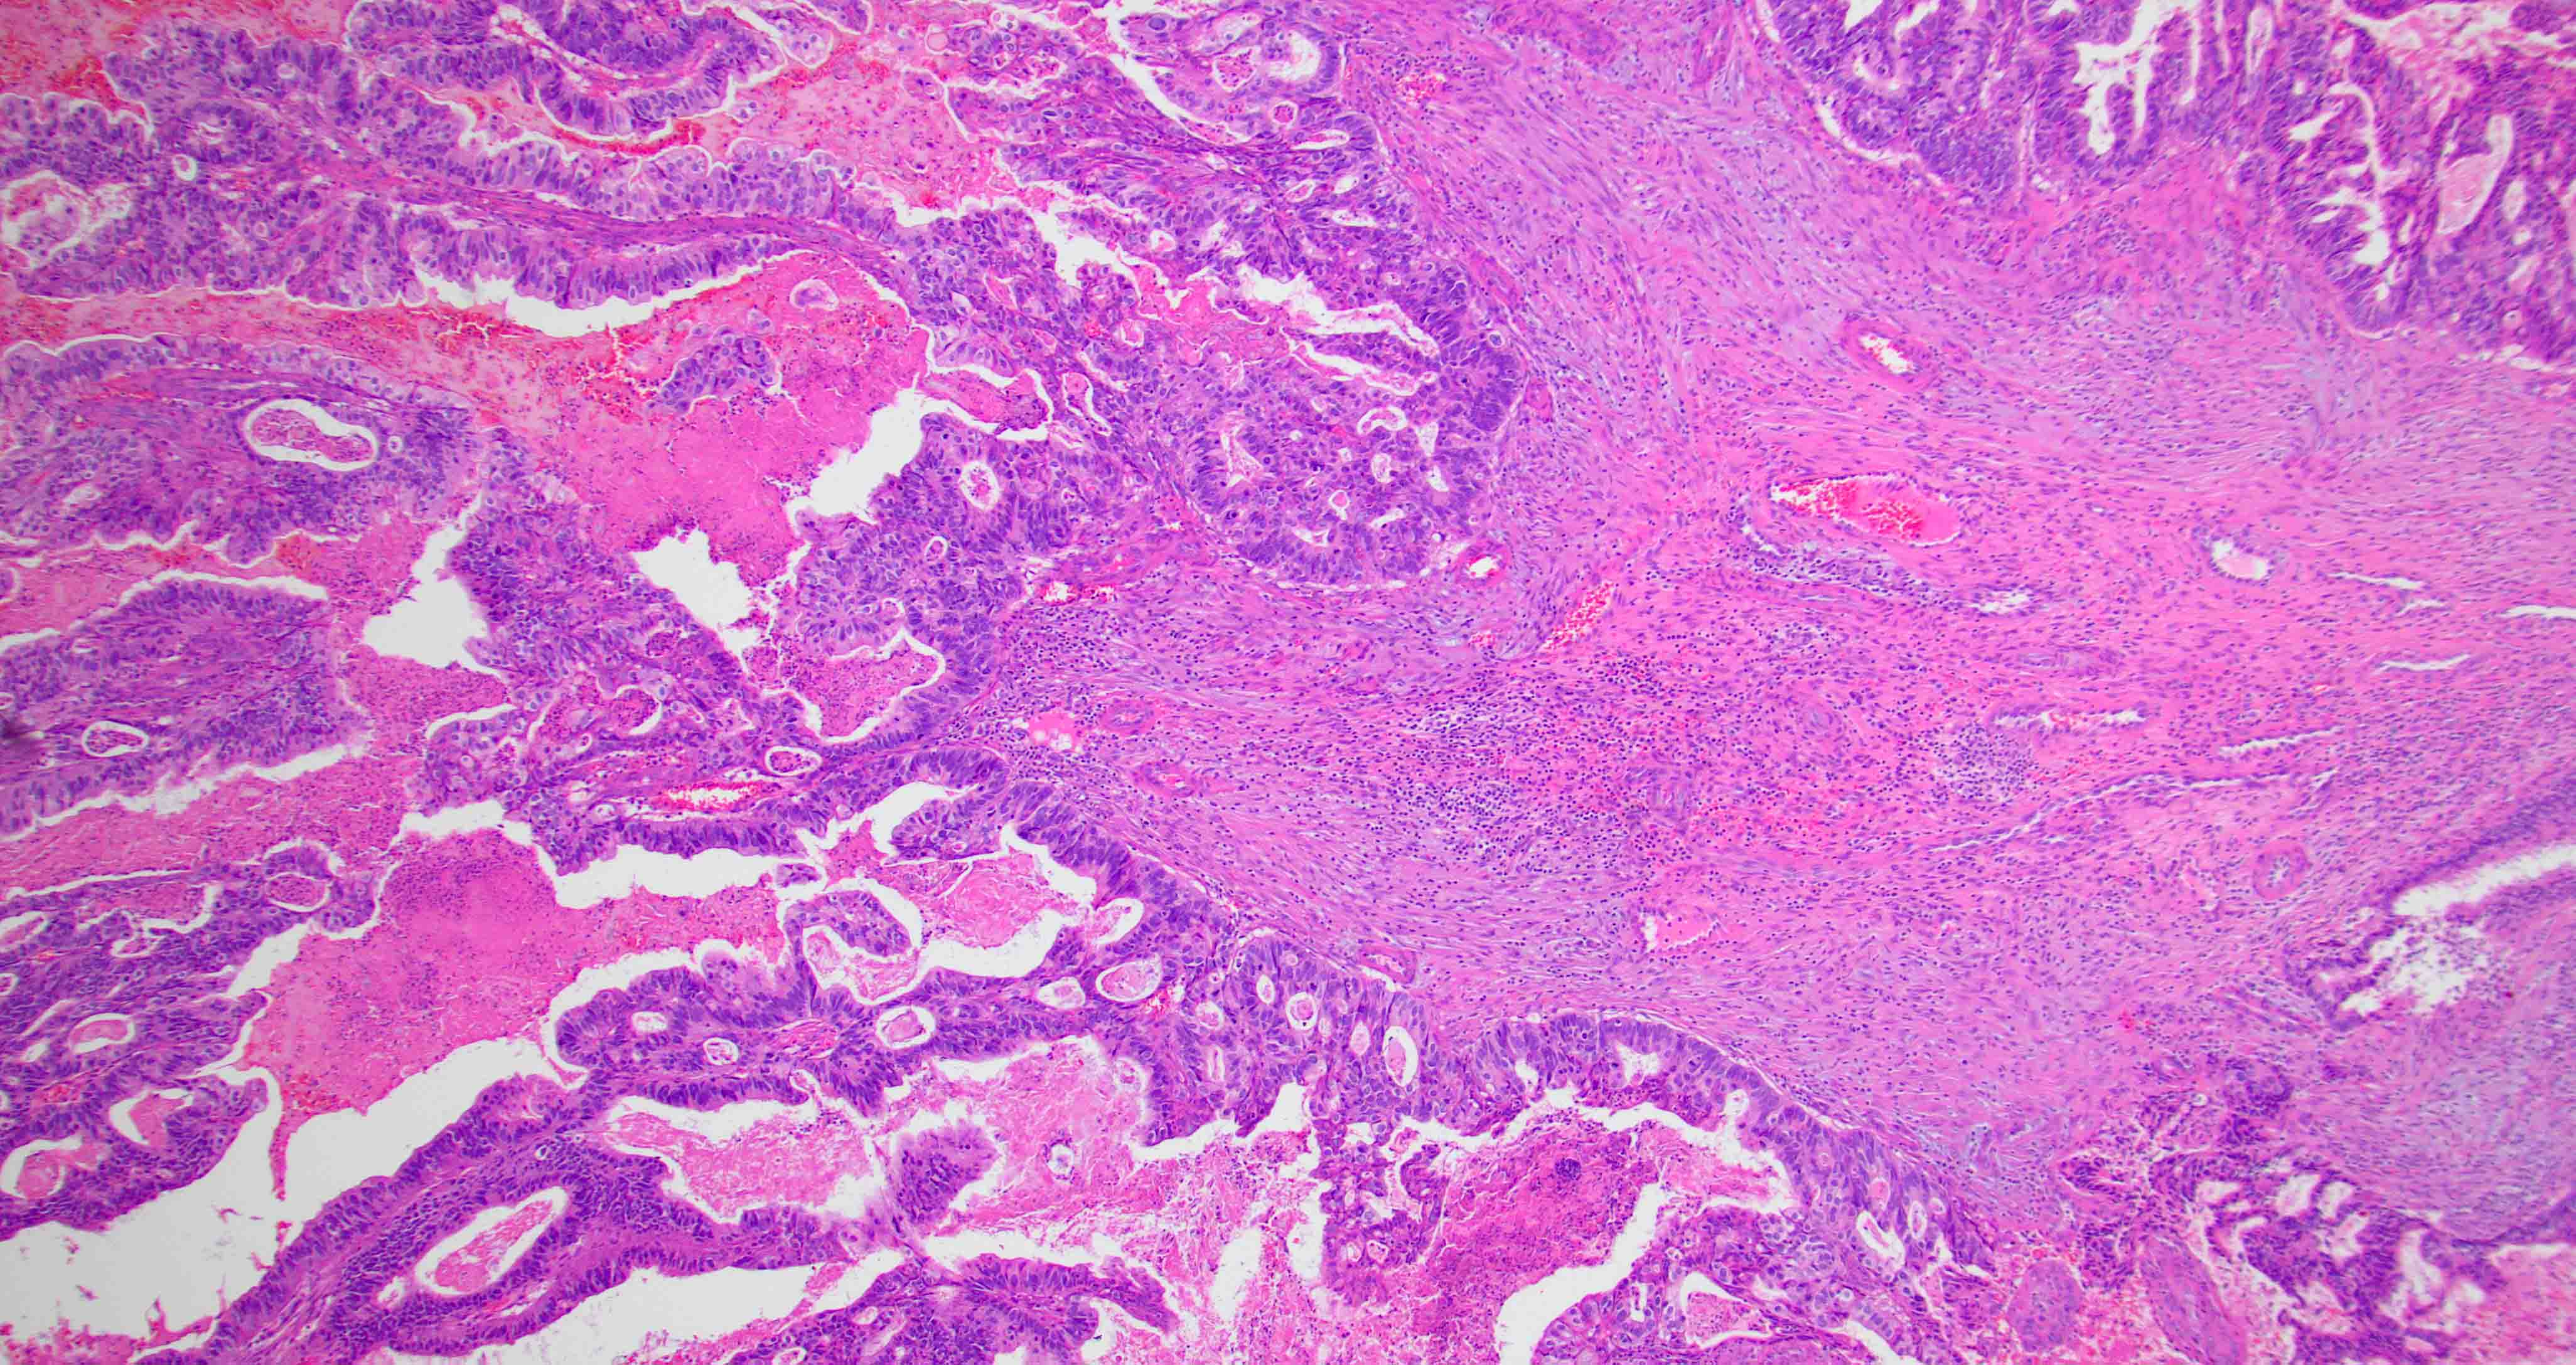 Adenocarcinoma with various architectures